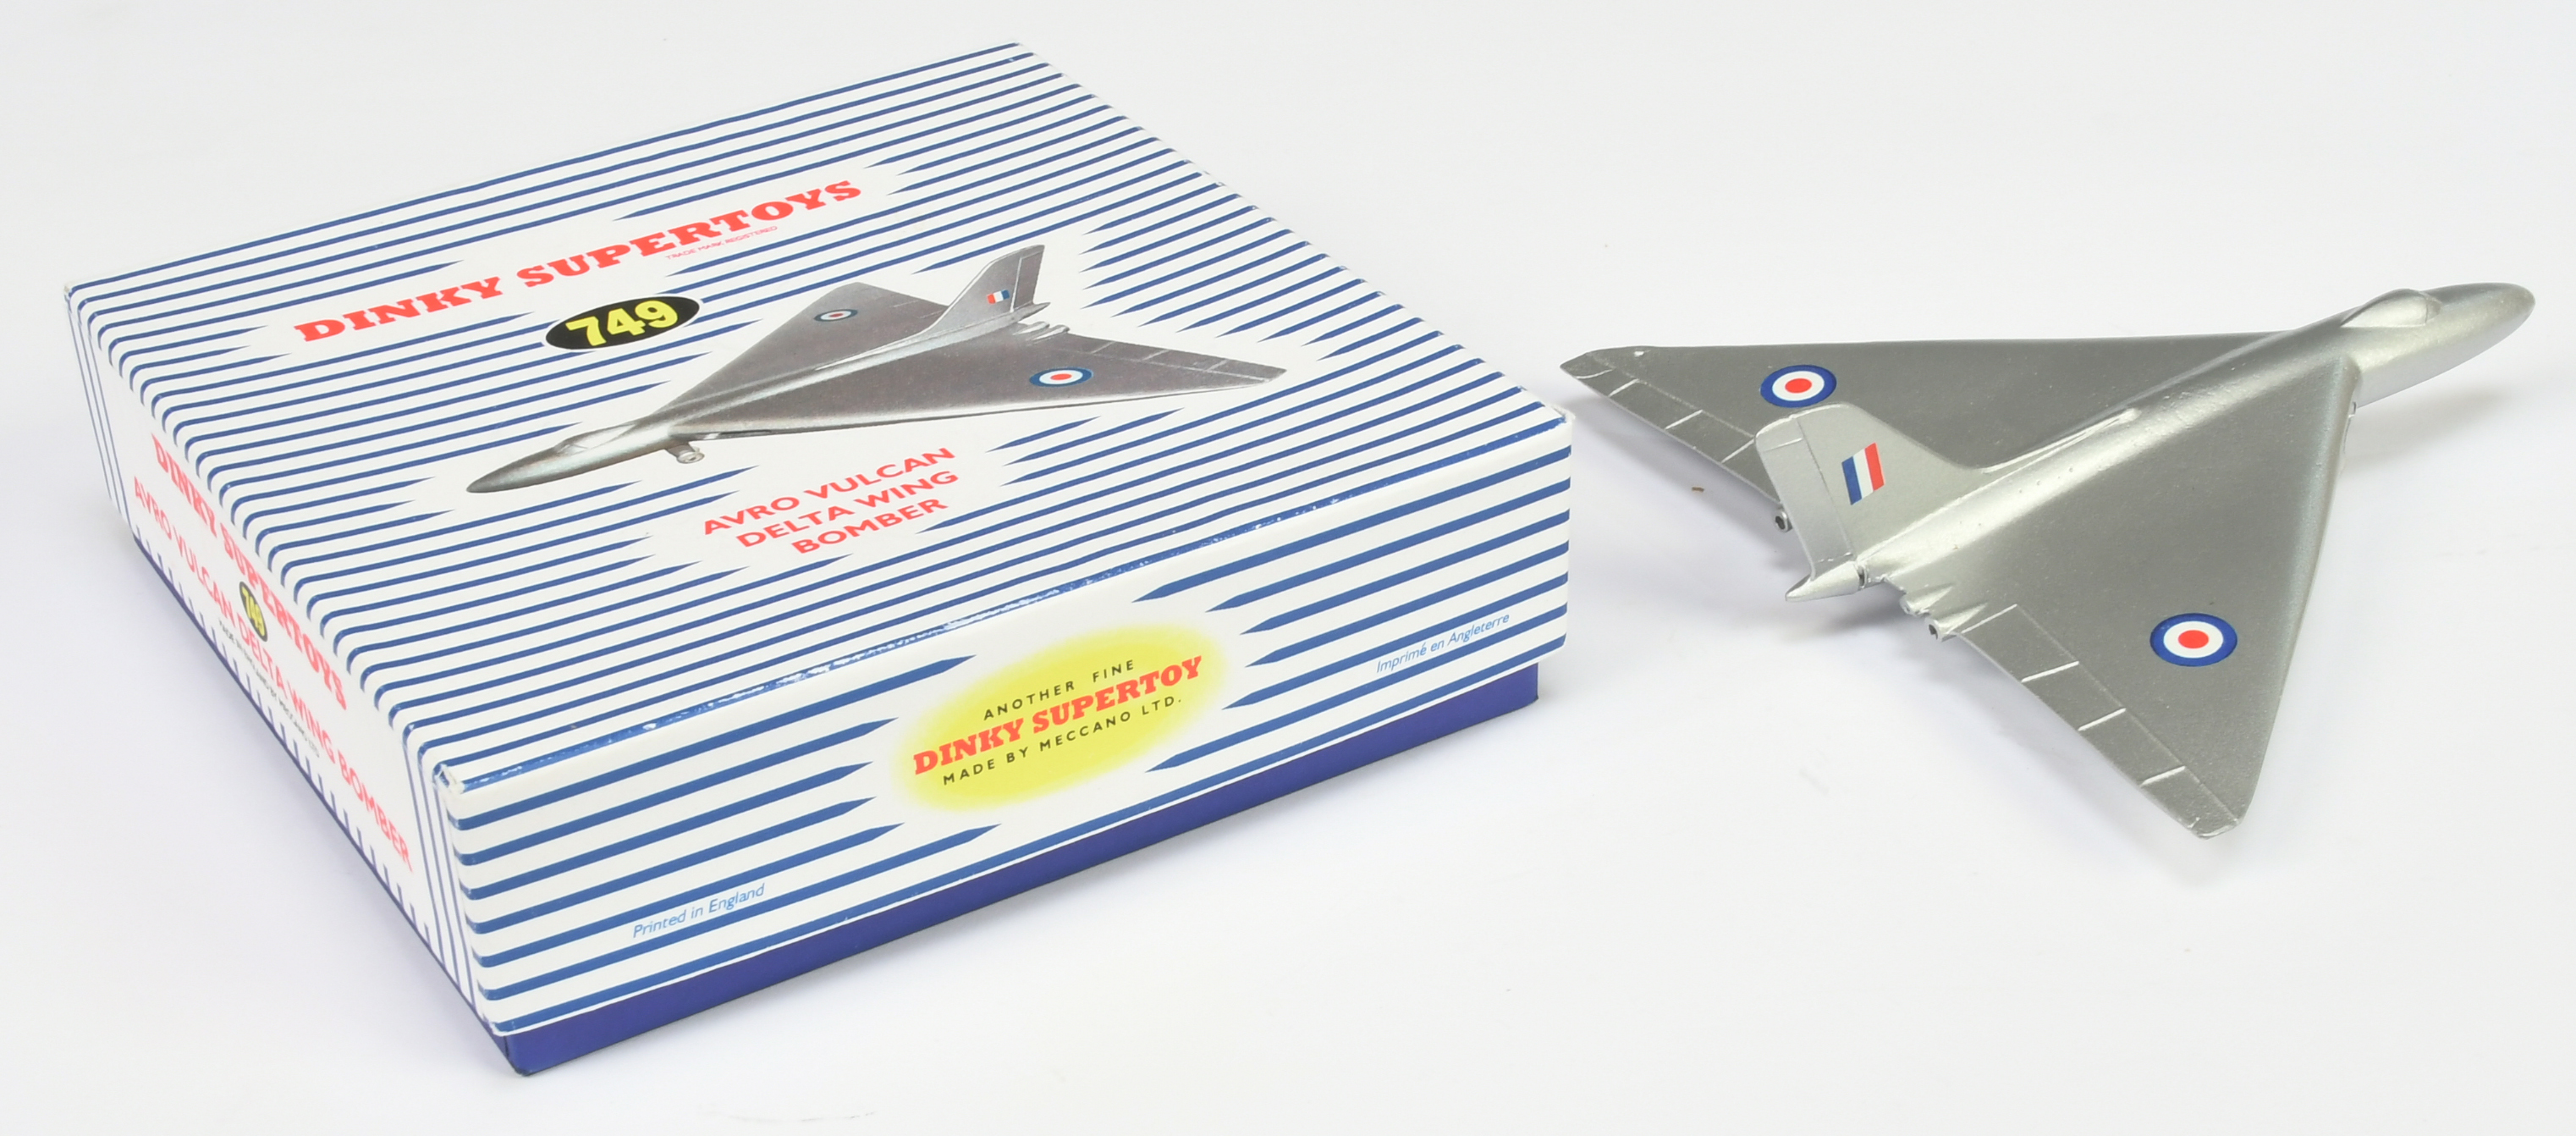 Dinky Toys (white Metal Recent Copy Issue) - 749 Vulcan Bomber - Silver with "RAF" roundels - Image 2 of 2